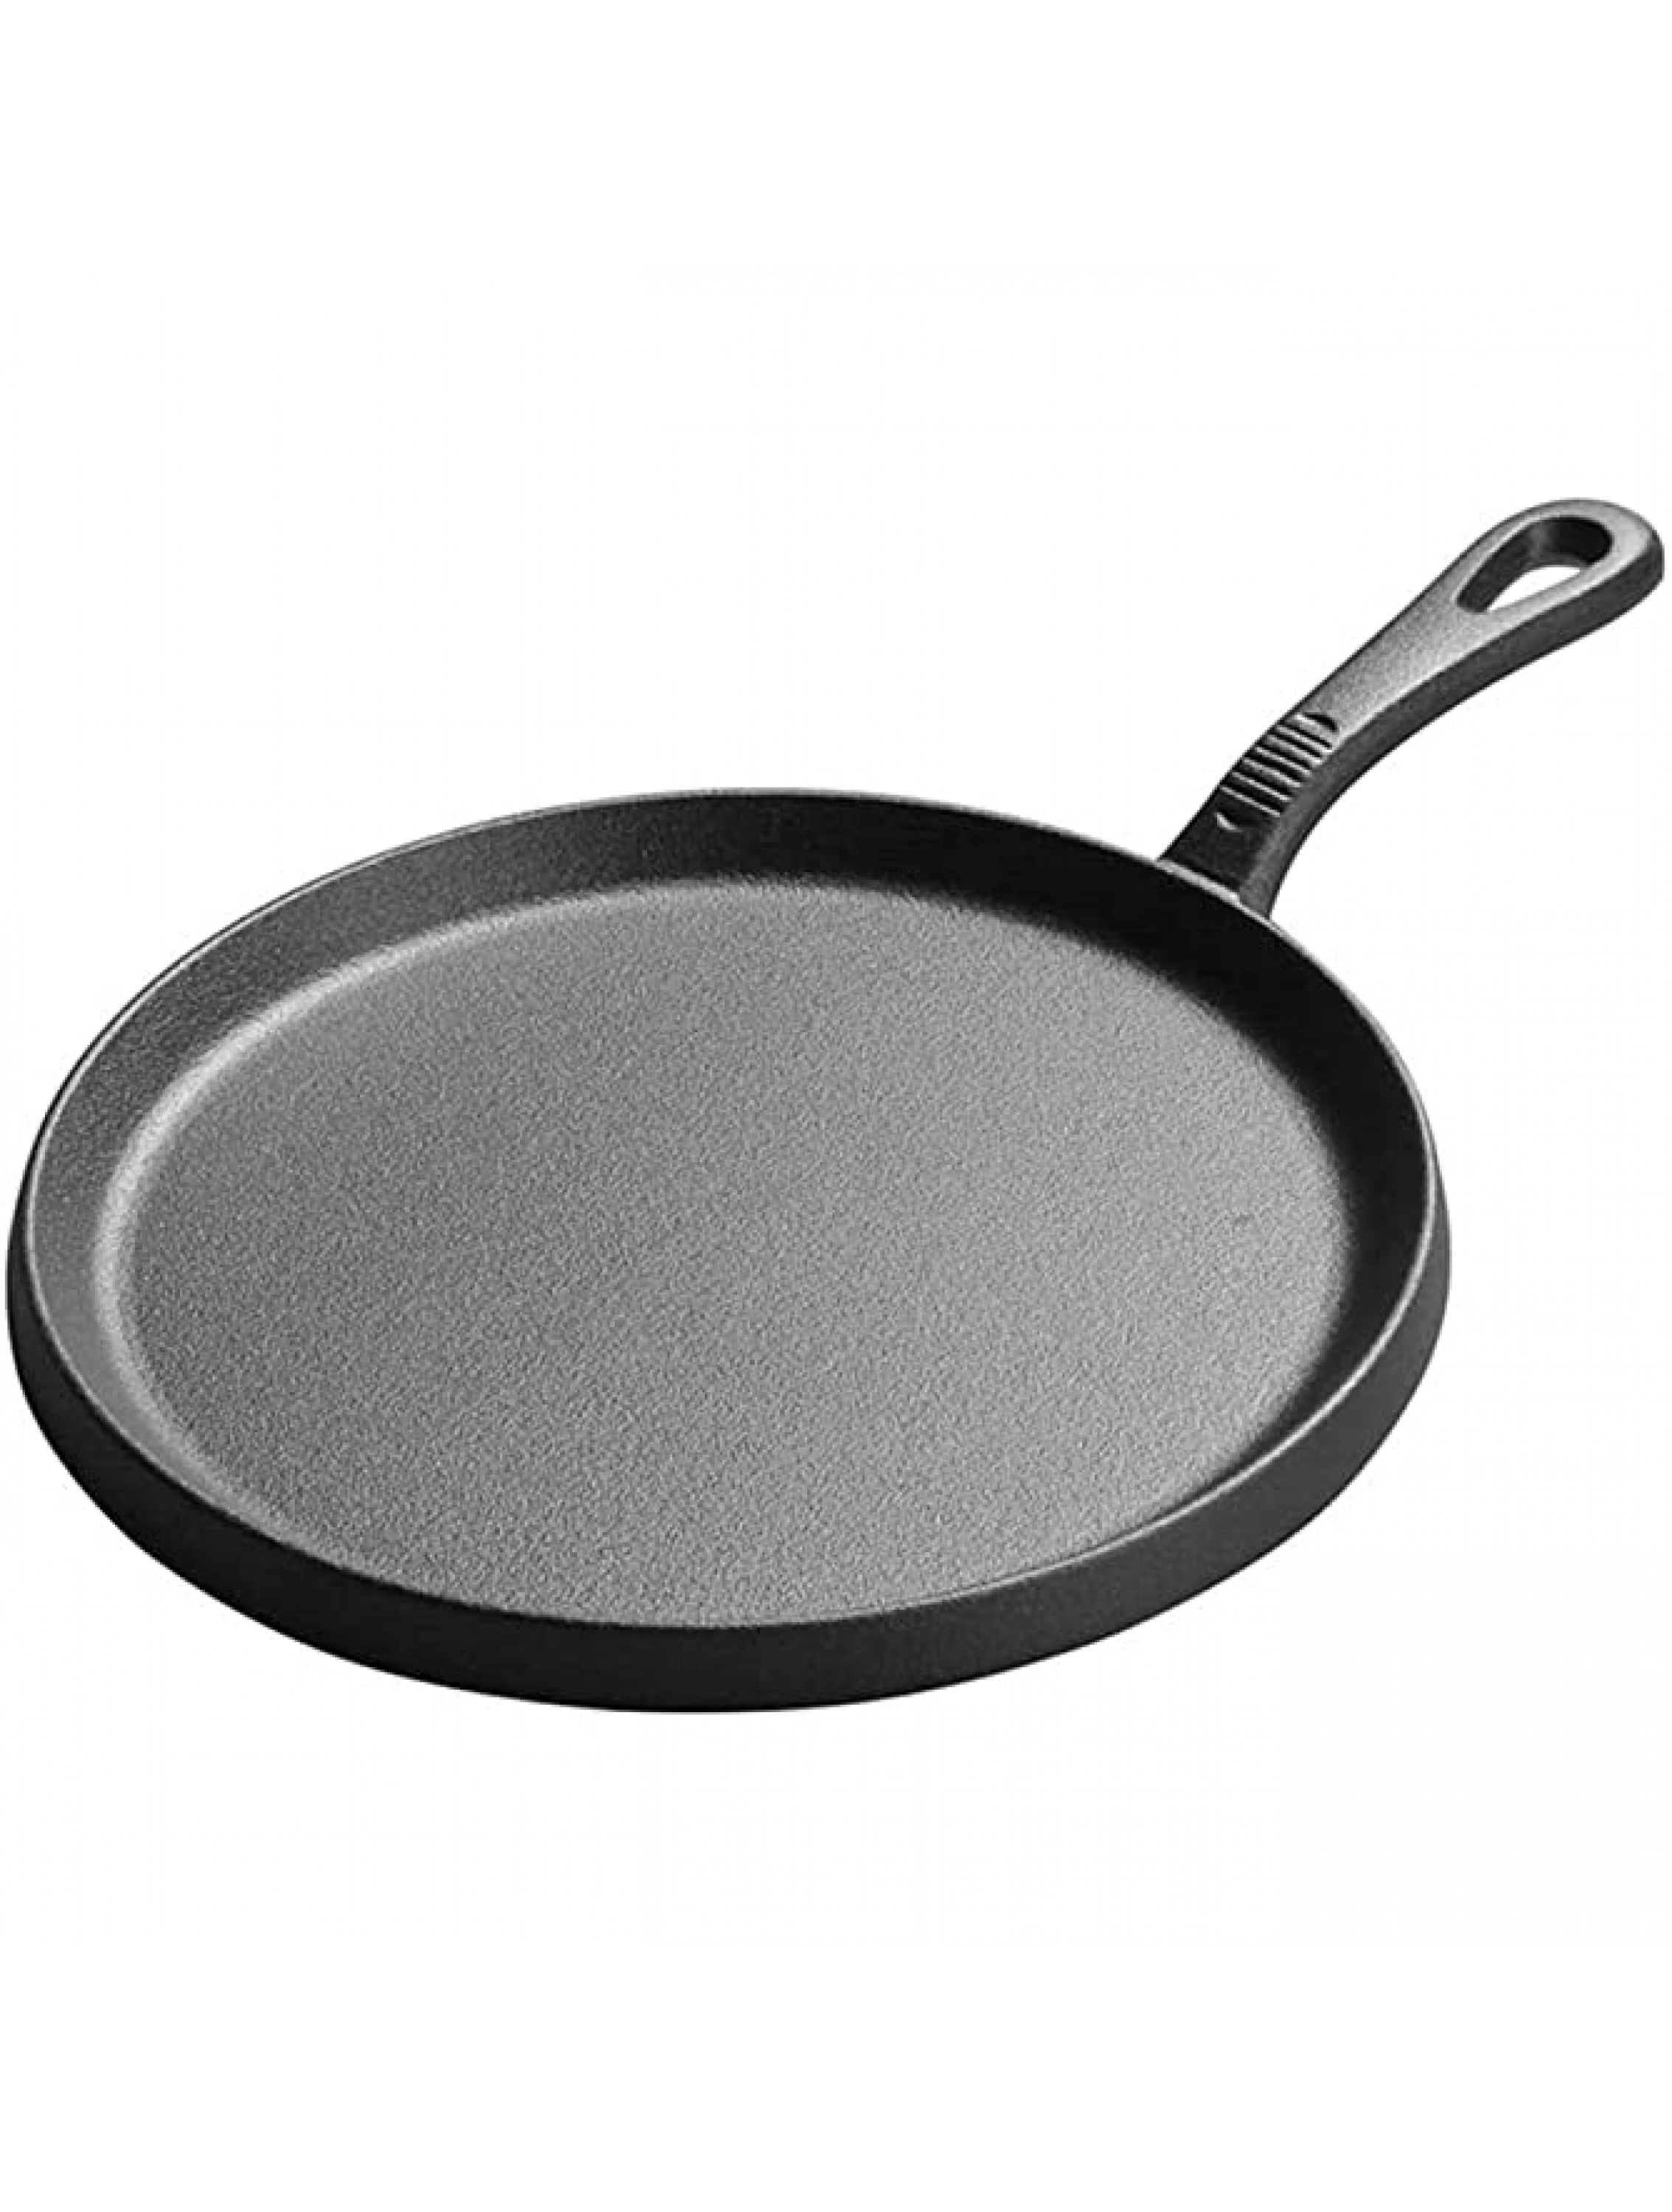 dxzsf Thickened Cast Iron Griddles Crepe Pan Omelet Pancake Griddles Home Non Stick 25Cm - B8SQP4GMP